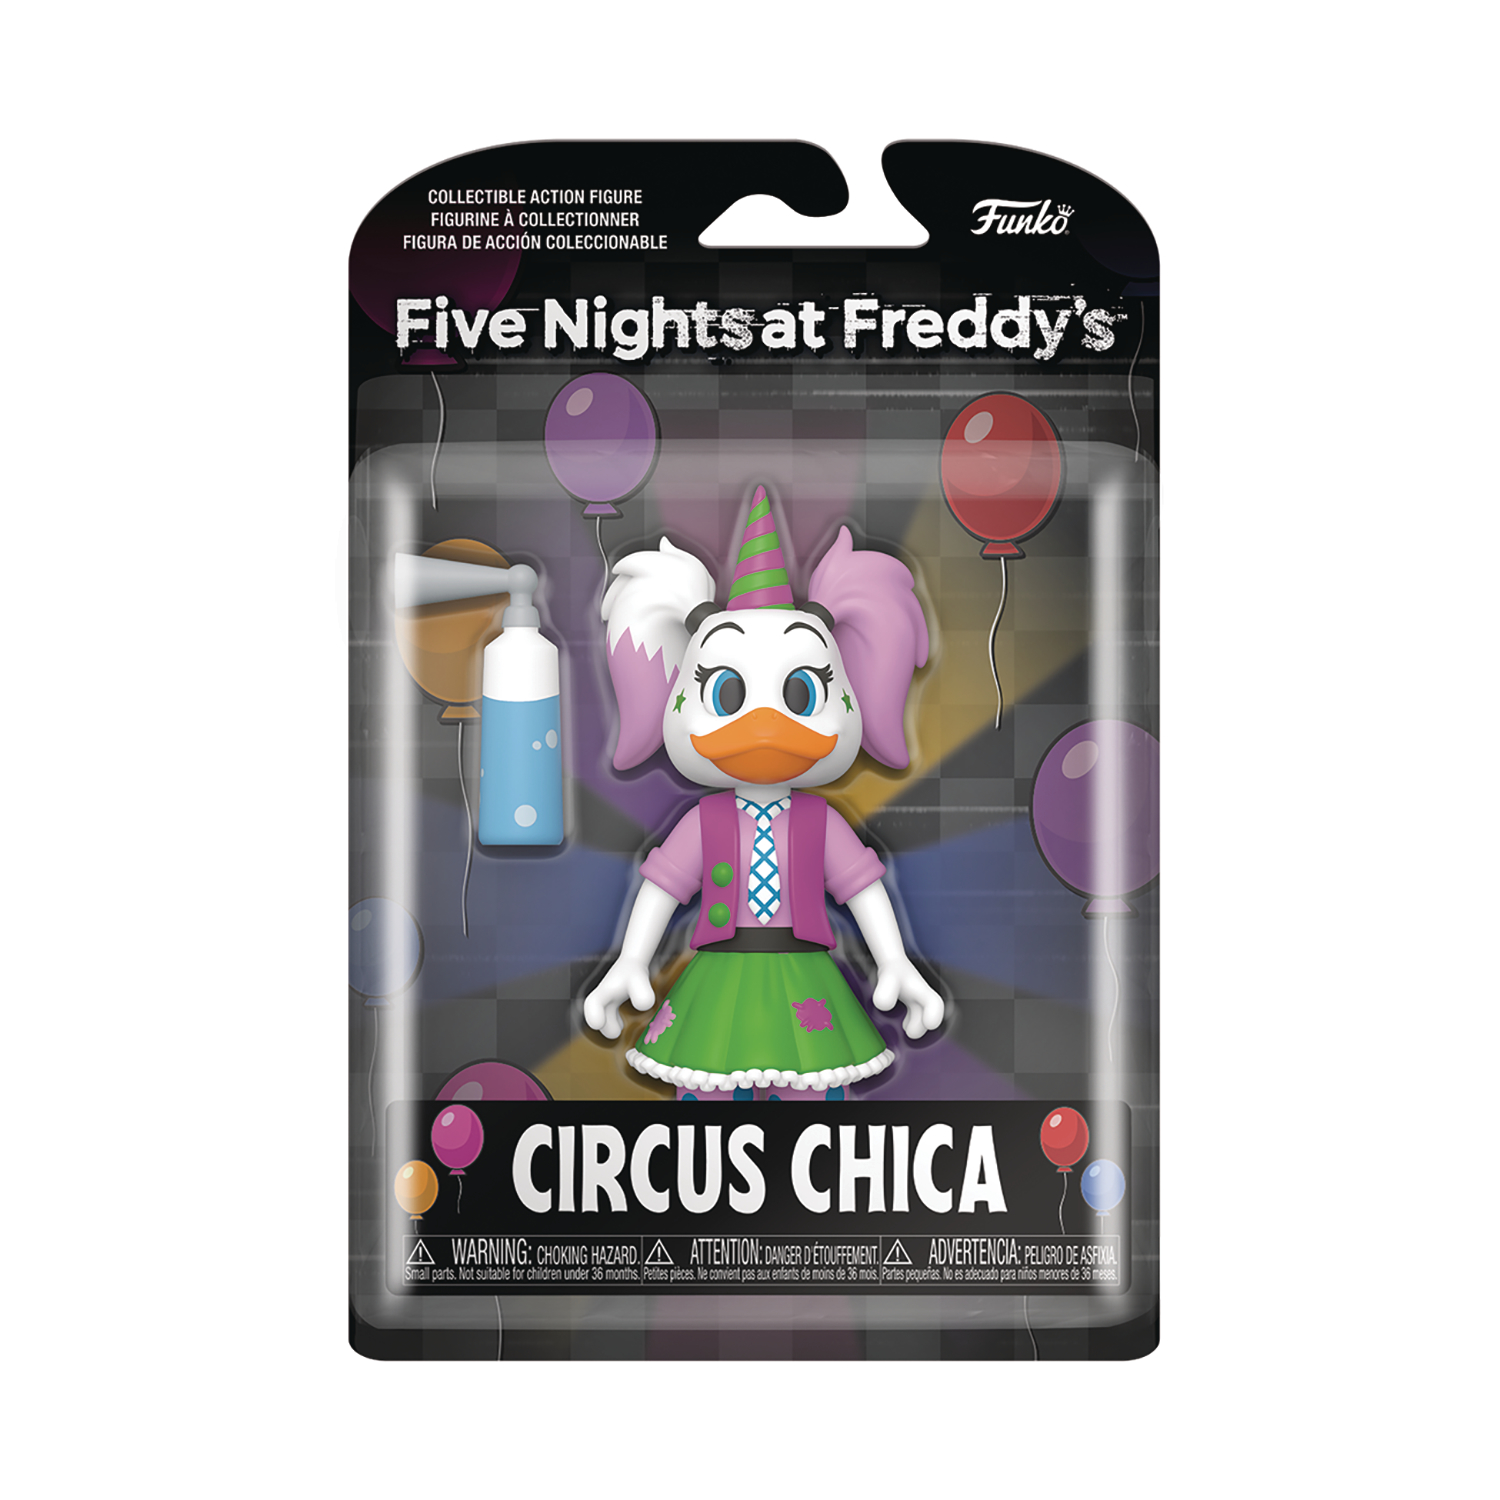 Five Nights At Freddys Circus Chica Action Figure